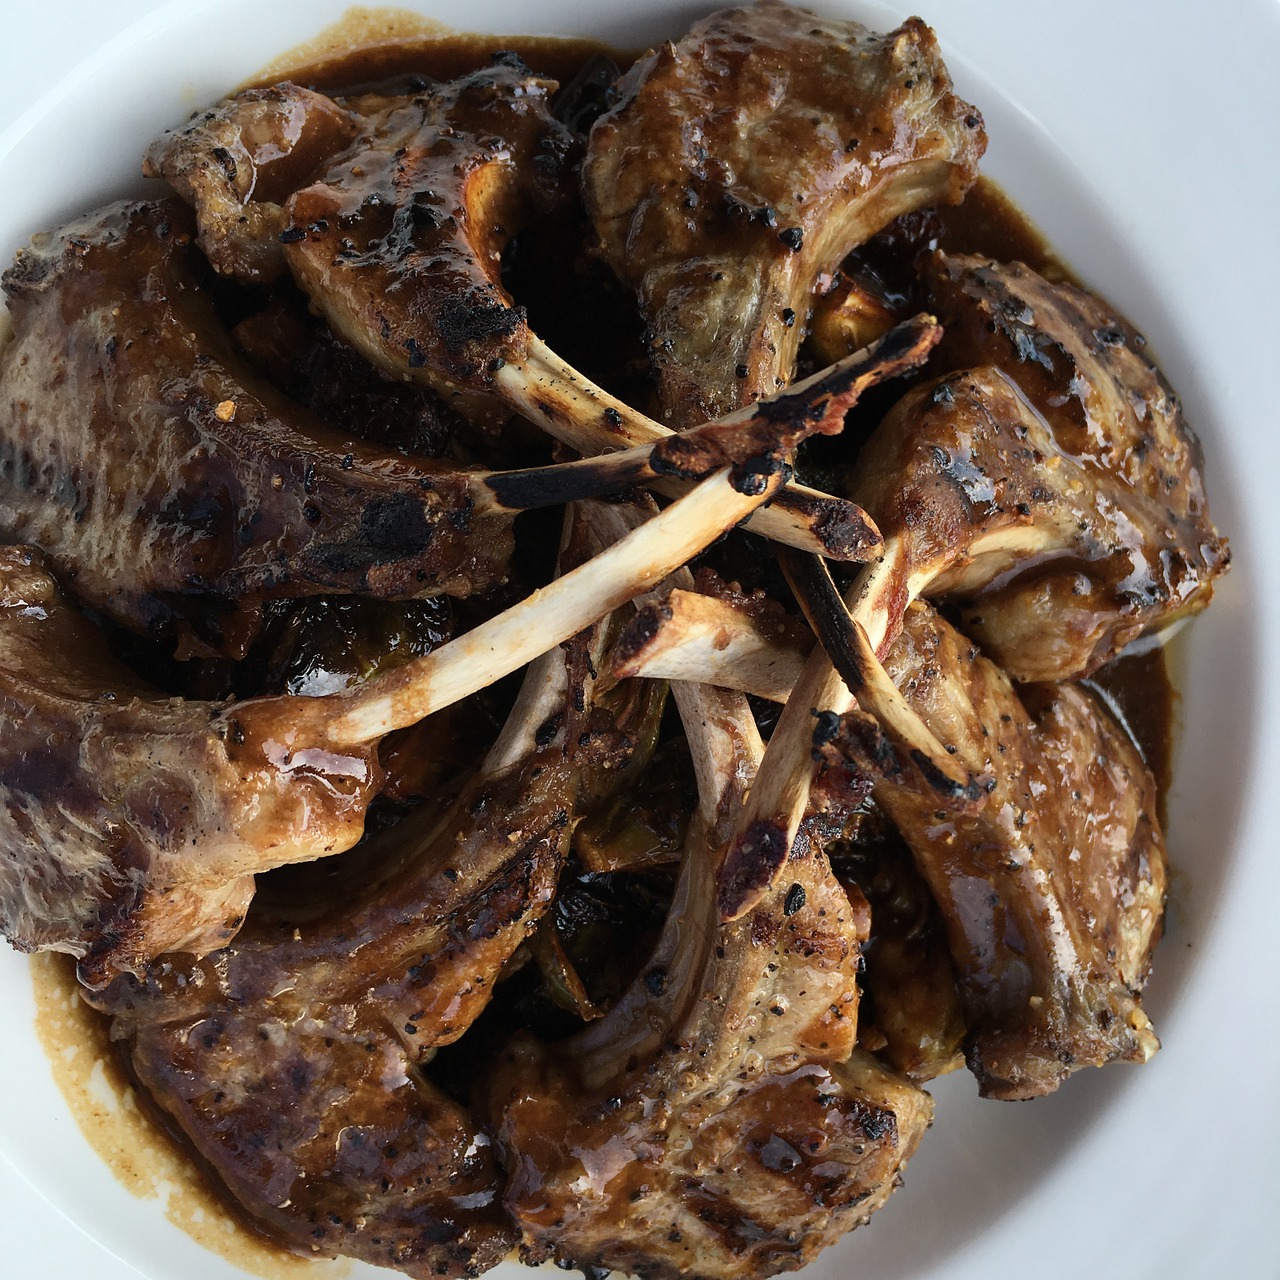 Rachael Ray's Broiled Lamb Chops With Balsamic Reduction